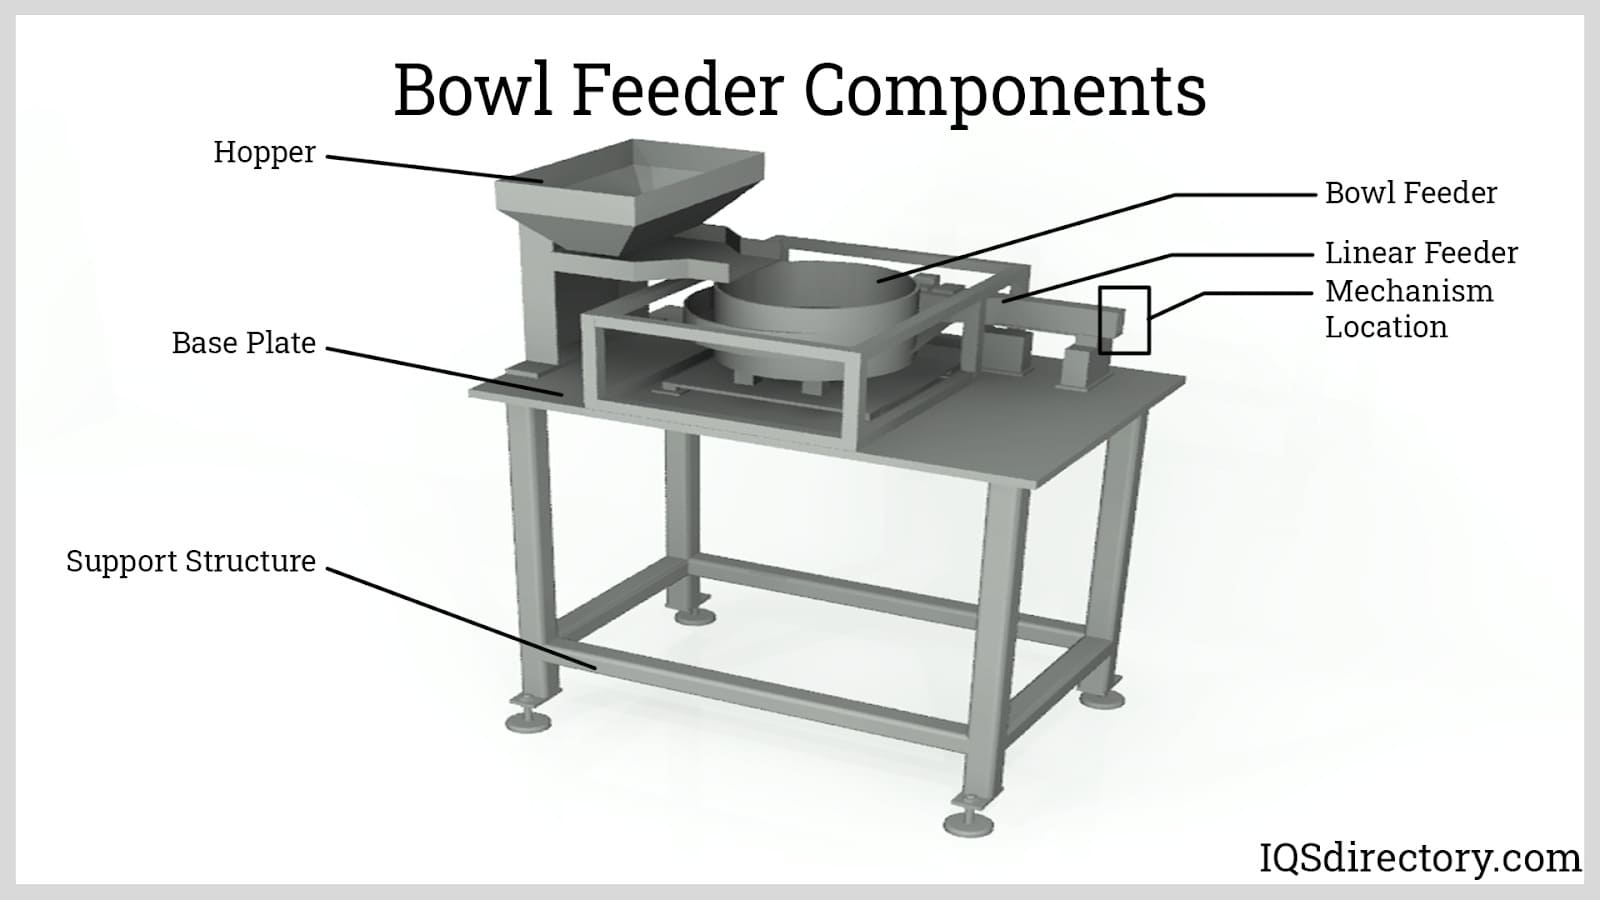 Bowl Feeder Components